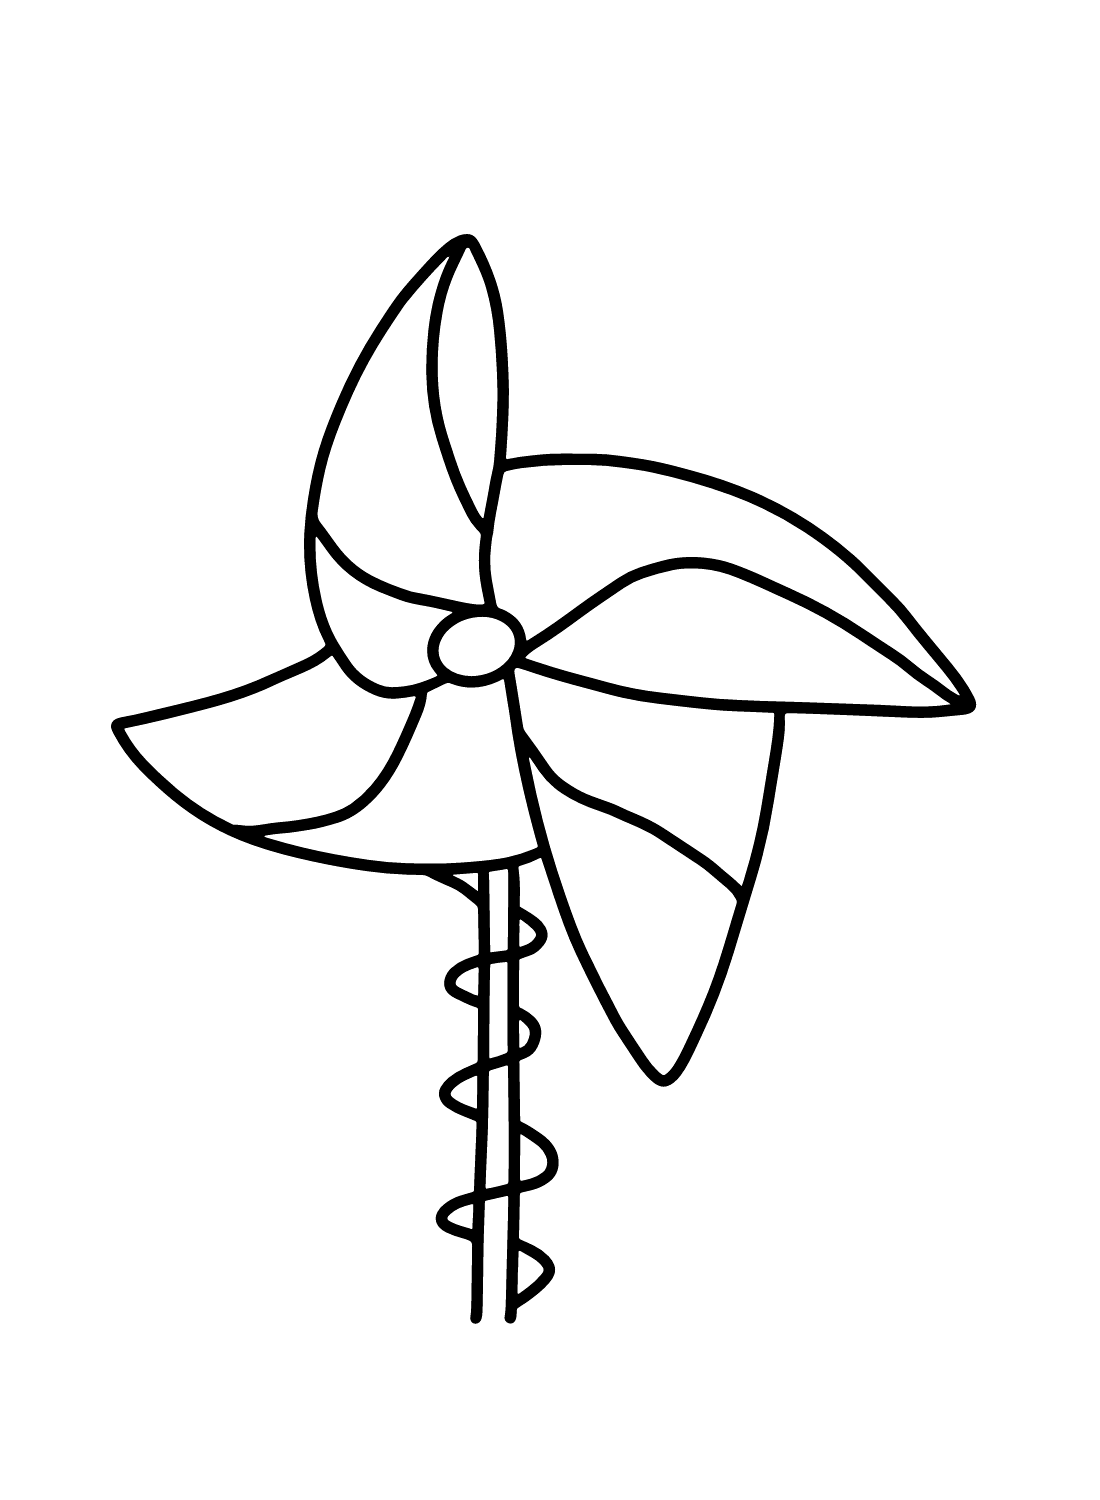 Pinwheel Pictures Coloring Page